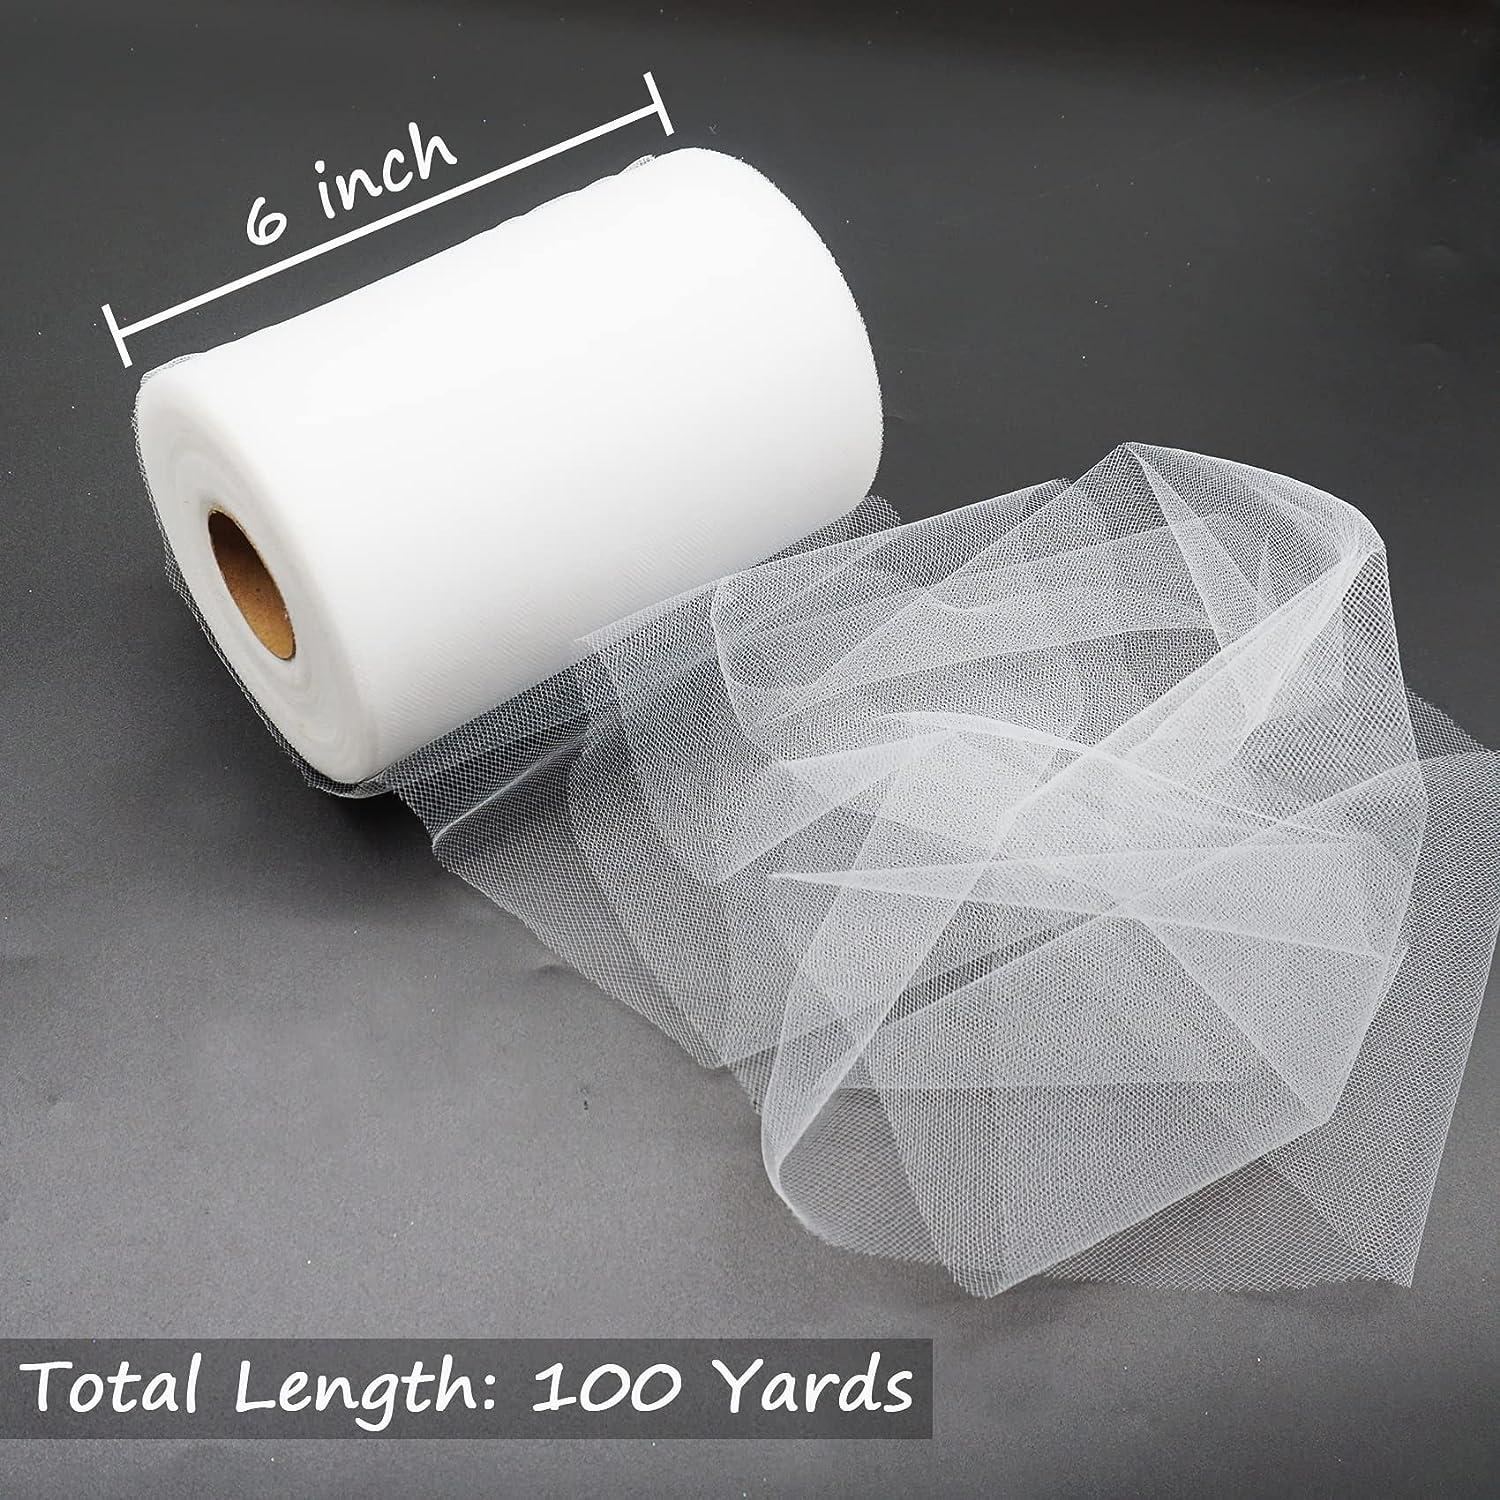 EXCEART 3 Rolls White Fabric Wedding Fabric Tulle Craft Ribbon Tulle Fabric  White Ribbon Tulle Spool Wedding Decor Tulle Ribbon for Gift Wrapping Tutu